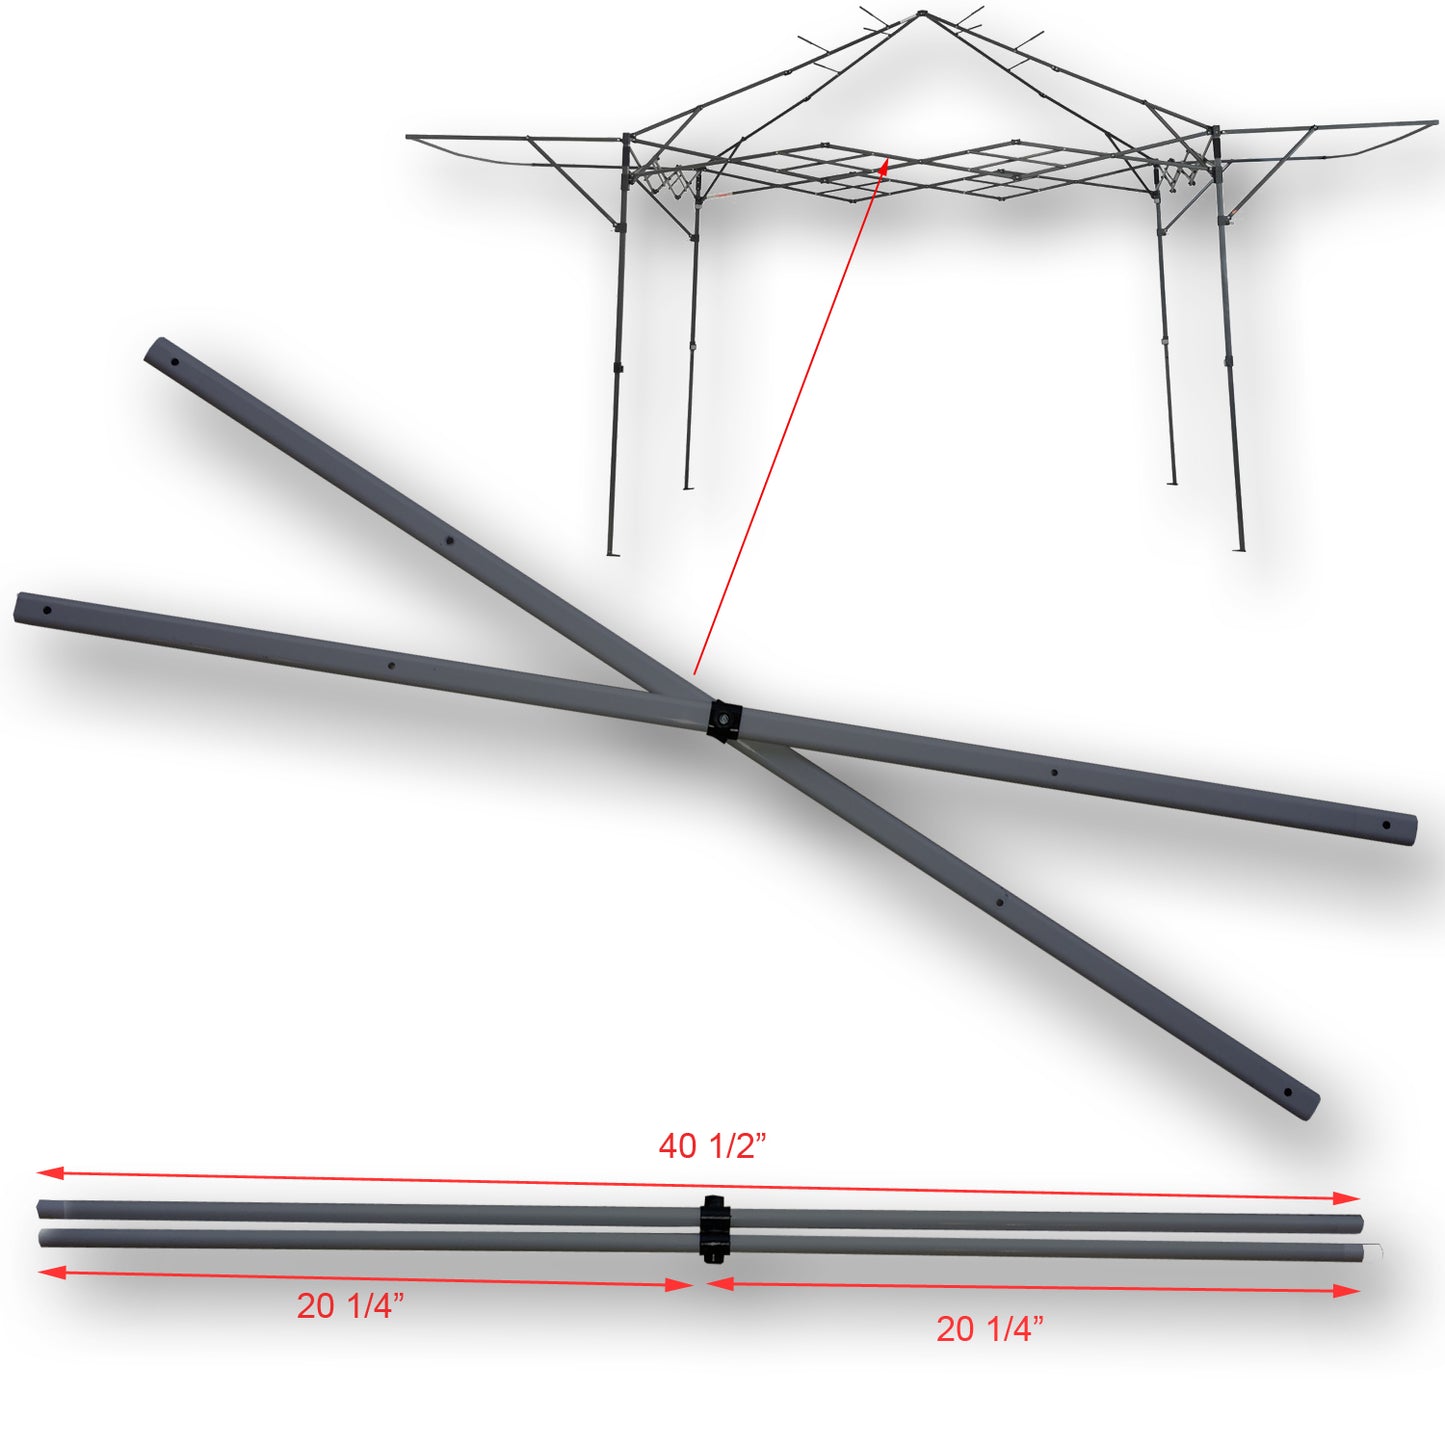 Quik Shade Summit Weekender Excursion 10' x 10 Canopy MIDDLE TRUSS Bar 40.5" Replacement Parts (Color Graphite)